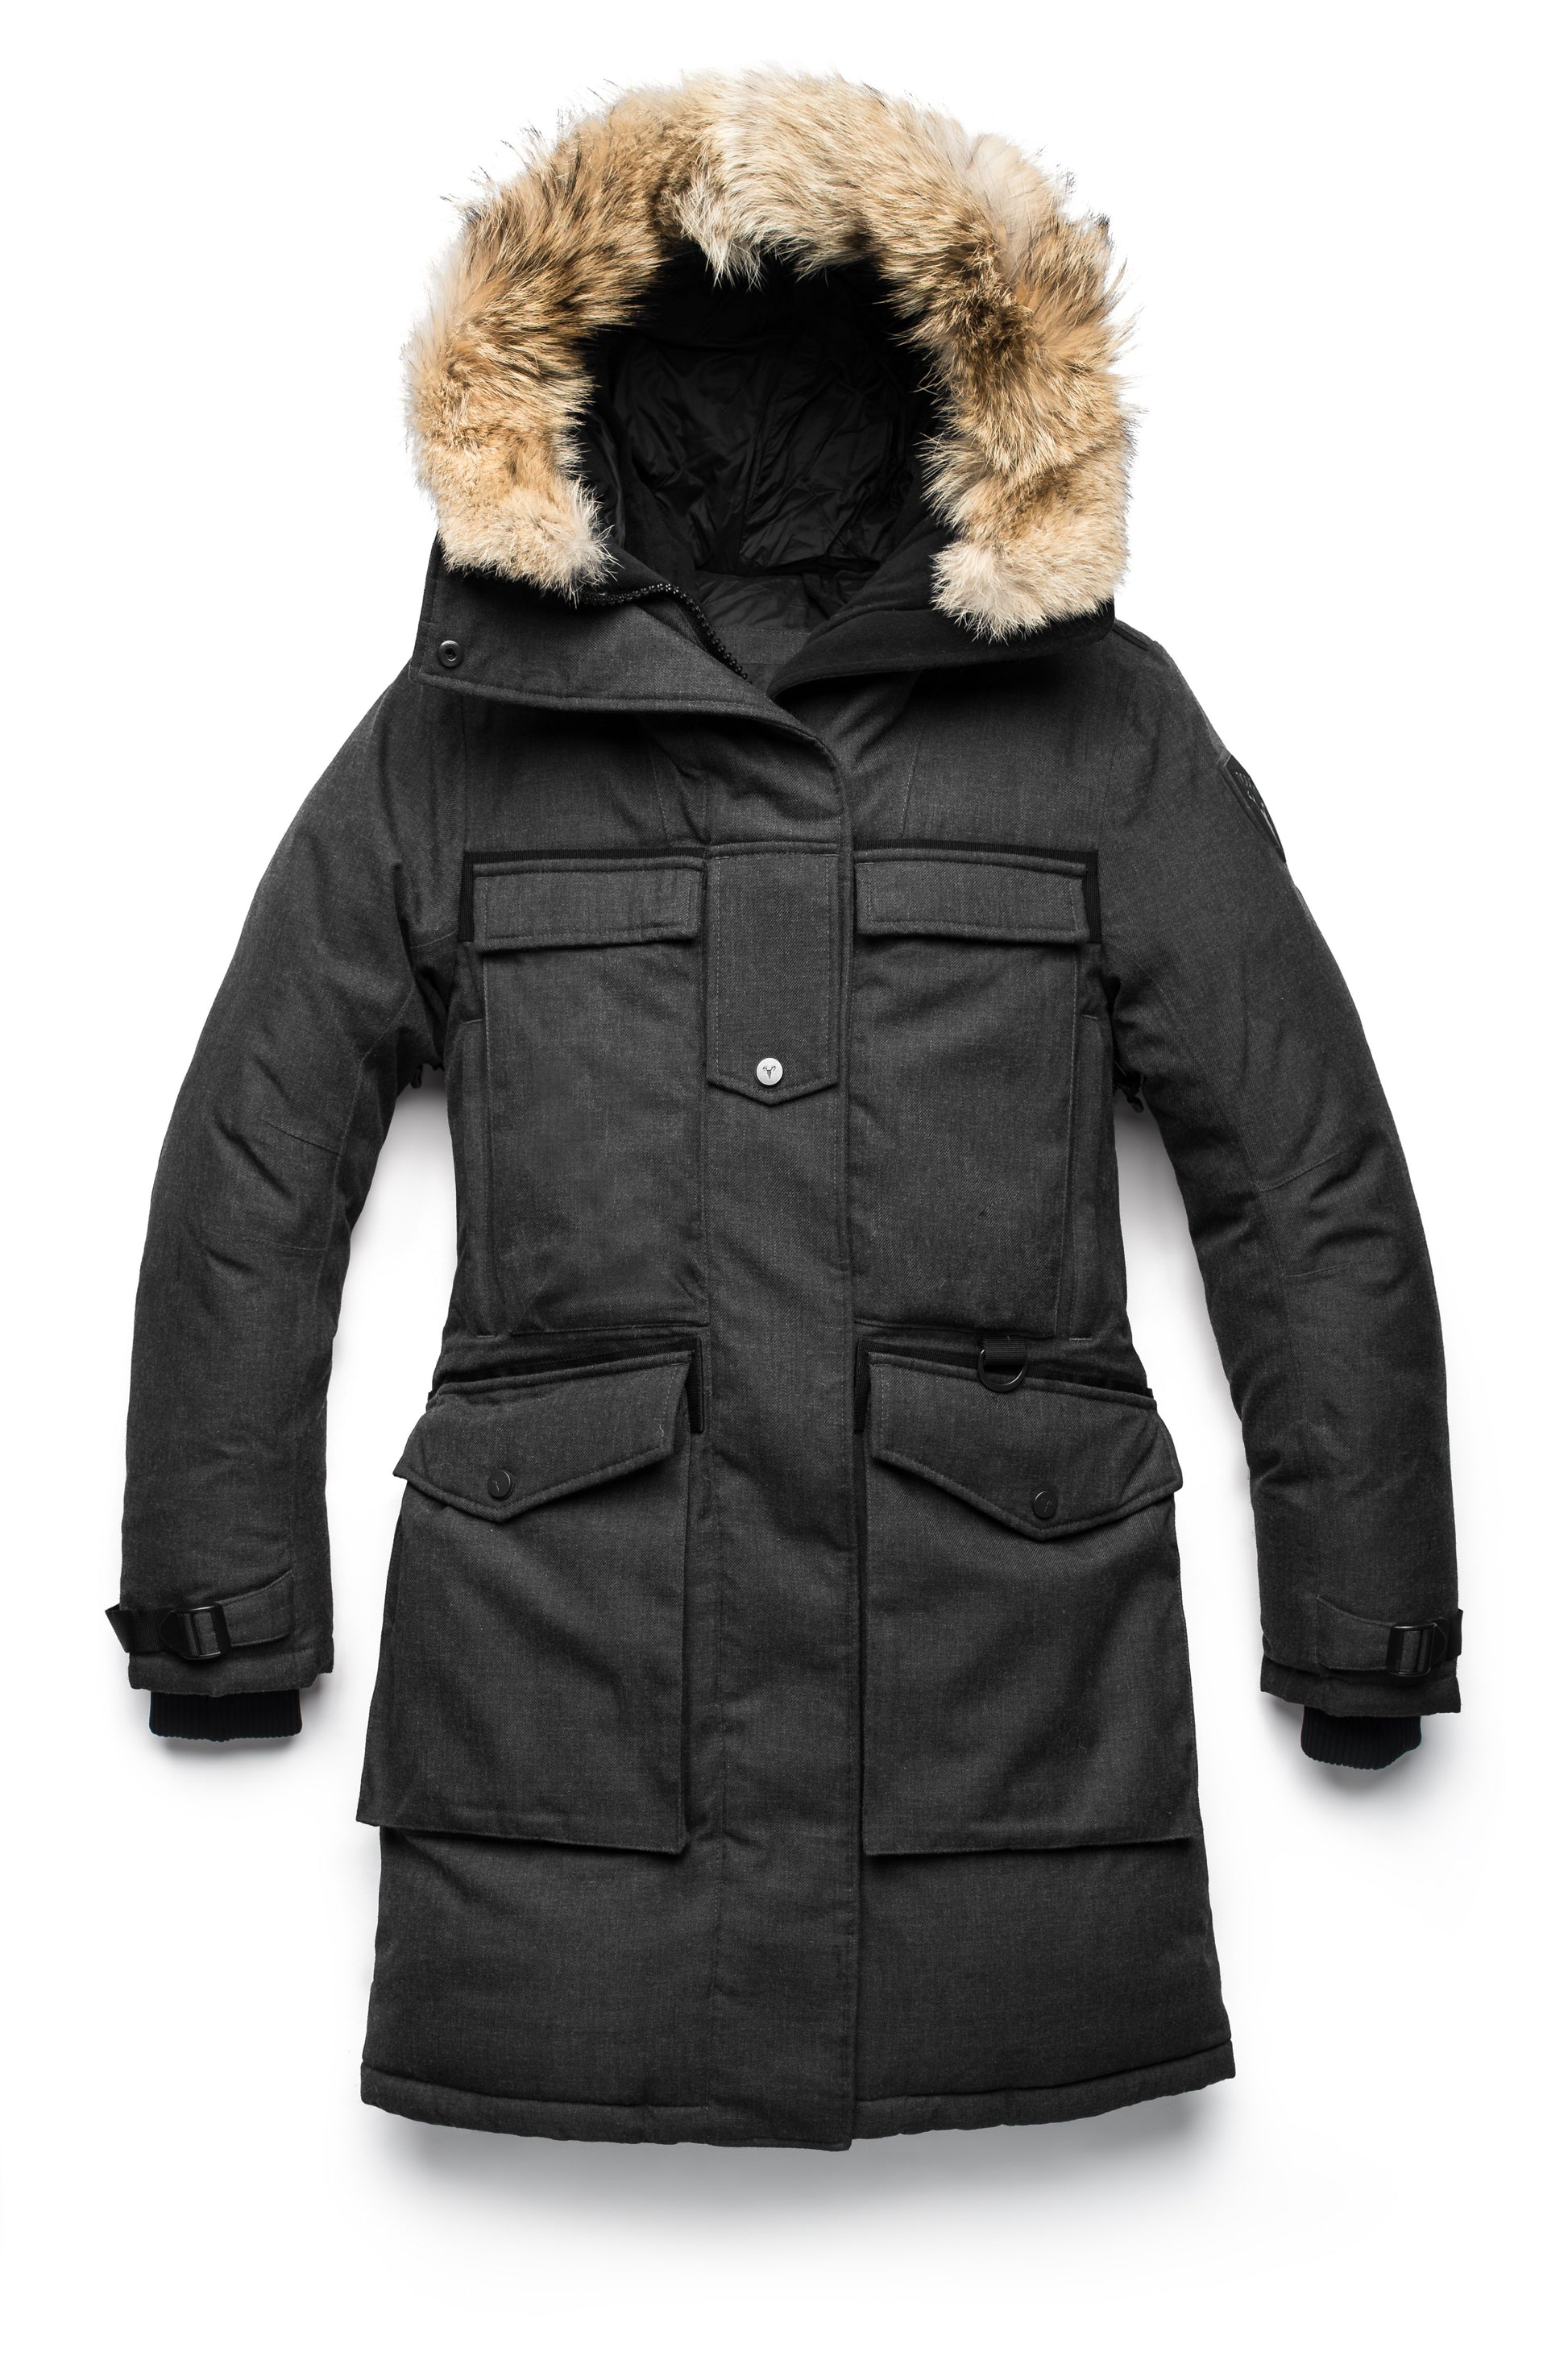 Women's Extreme Cold Weather Down Parks, Coats, and Jackets